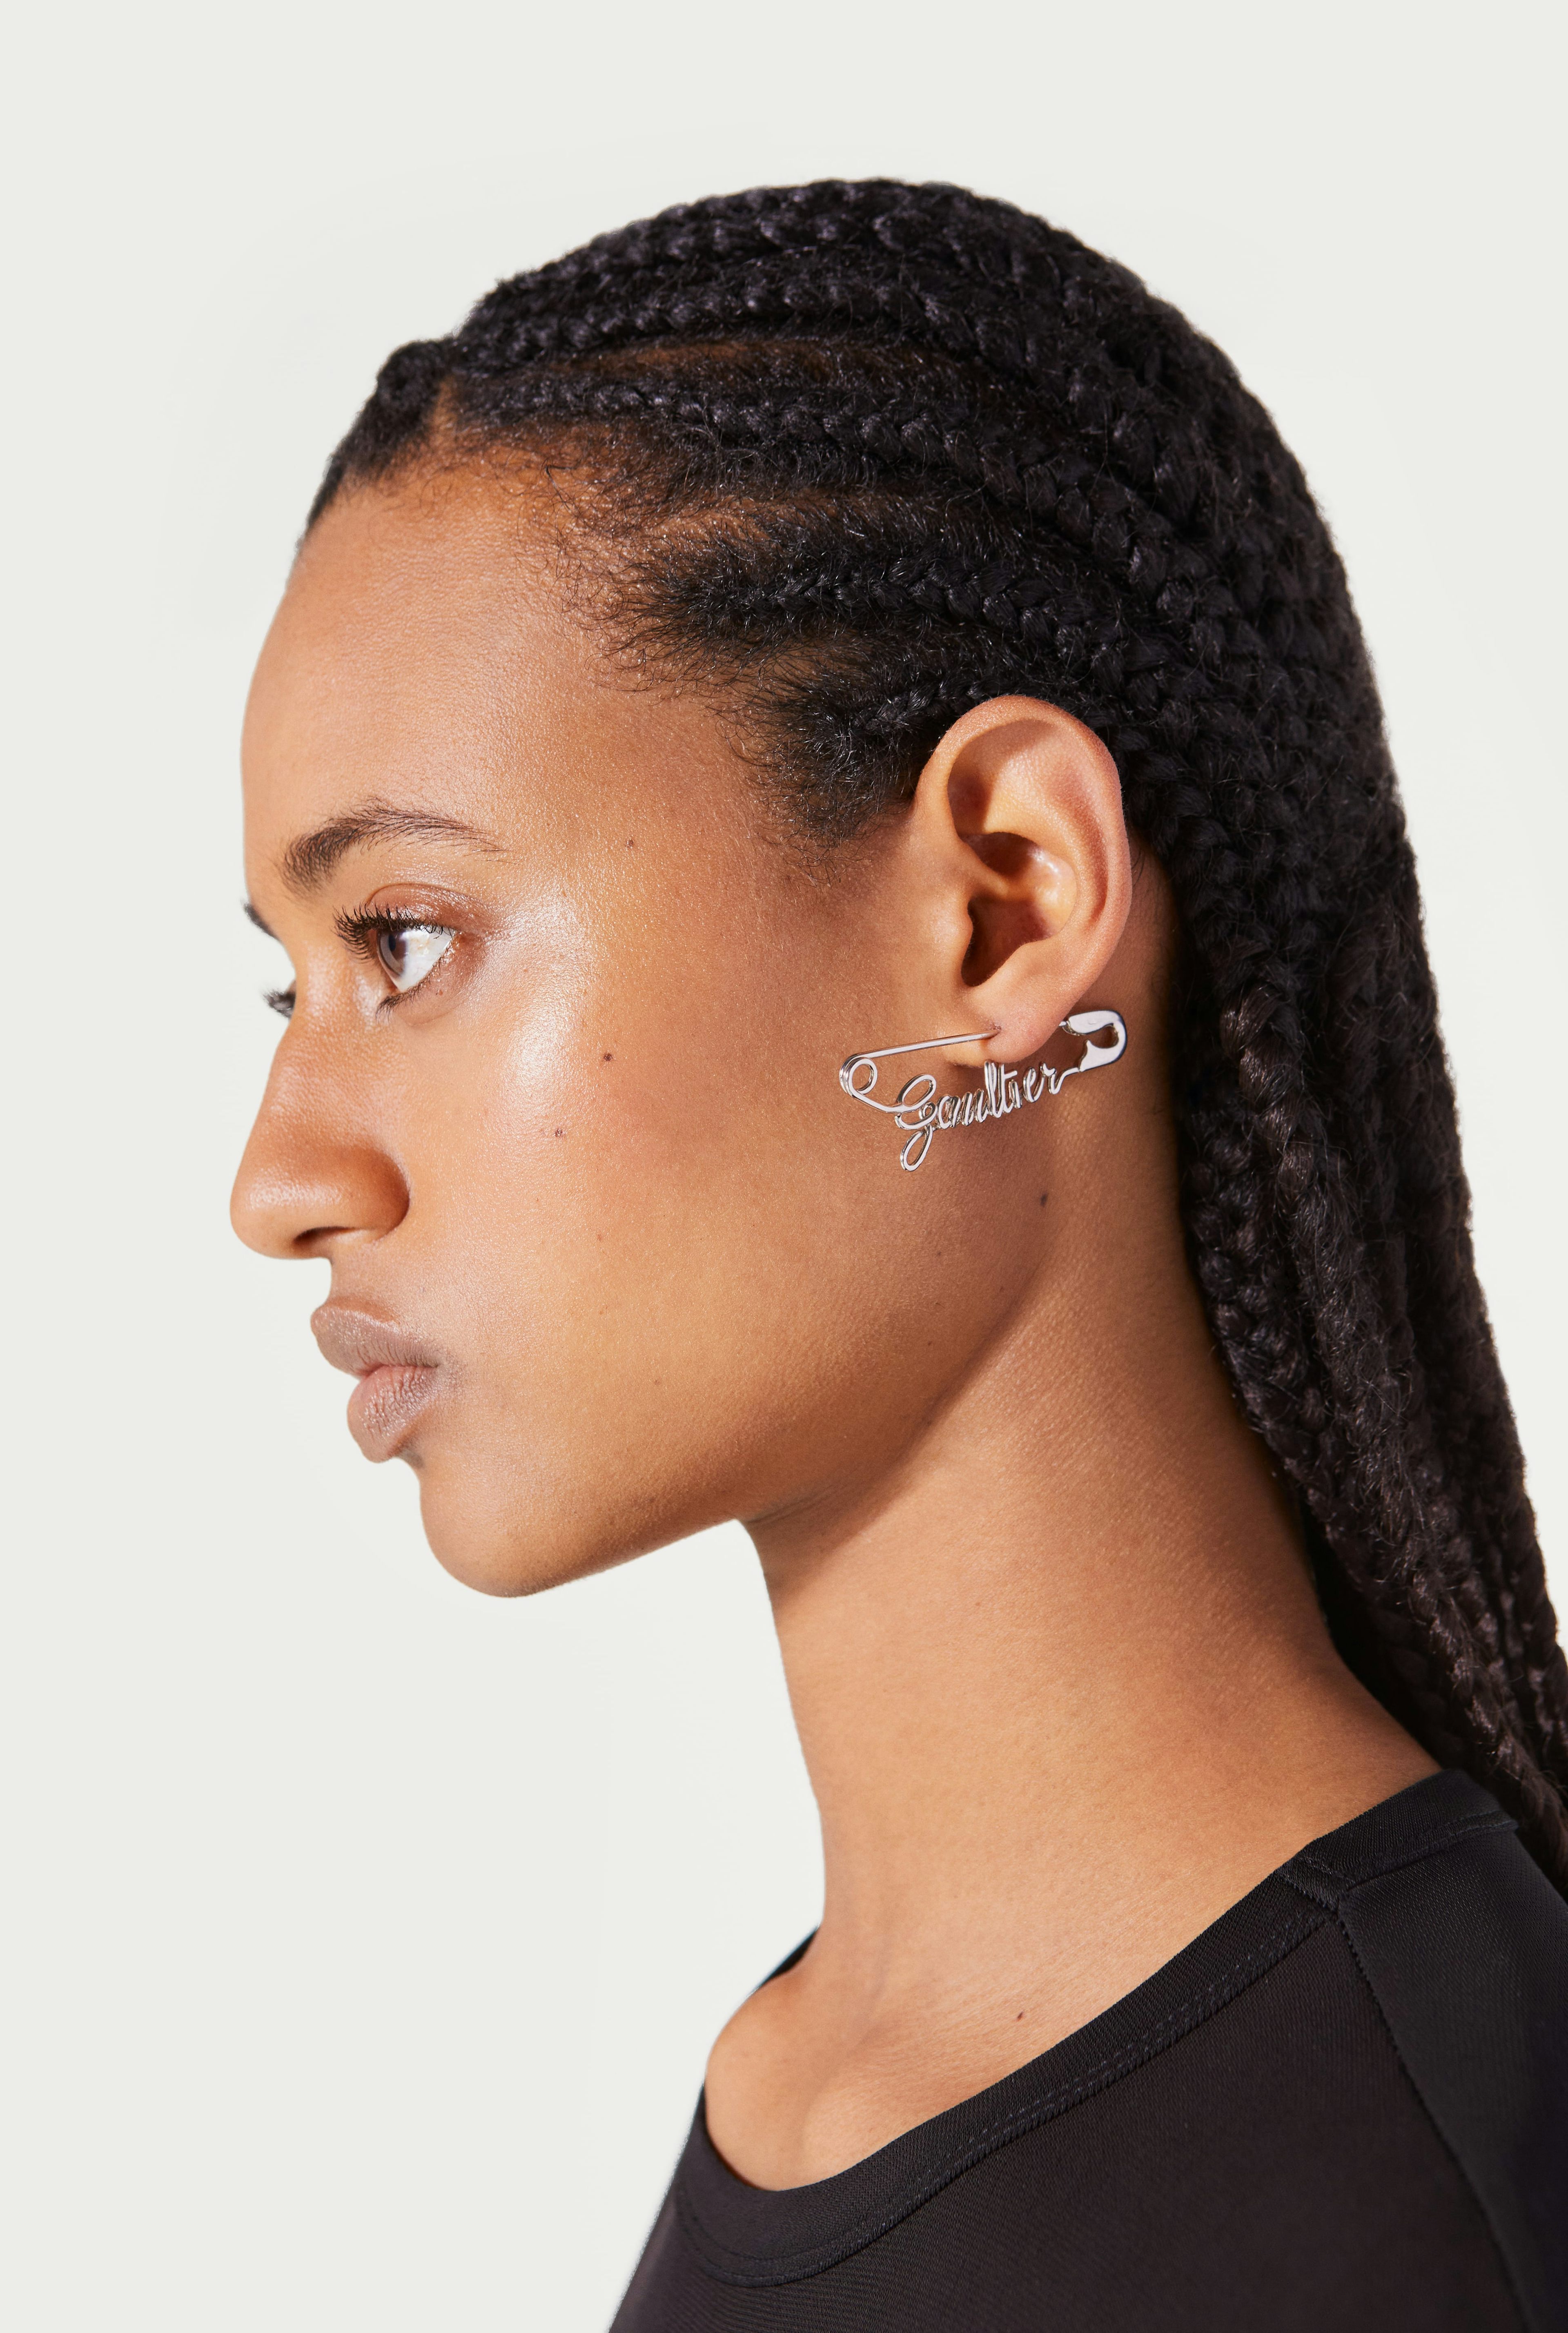 The Gaultier safety pin earring 